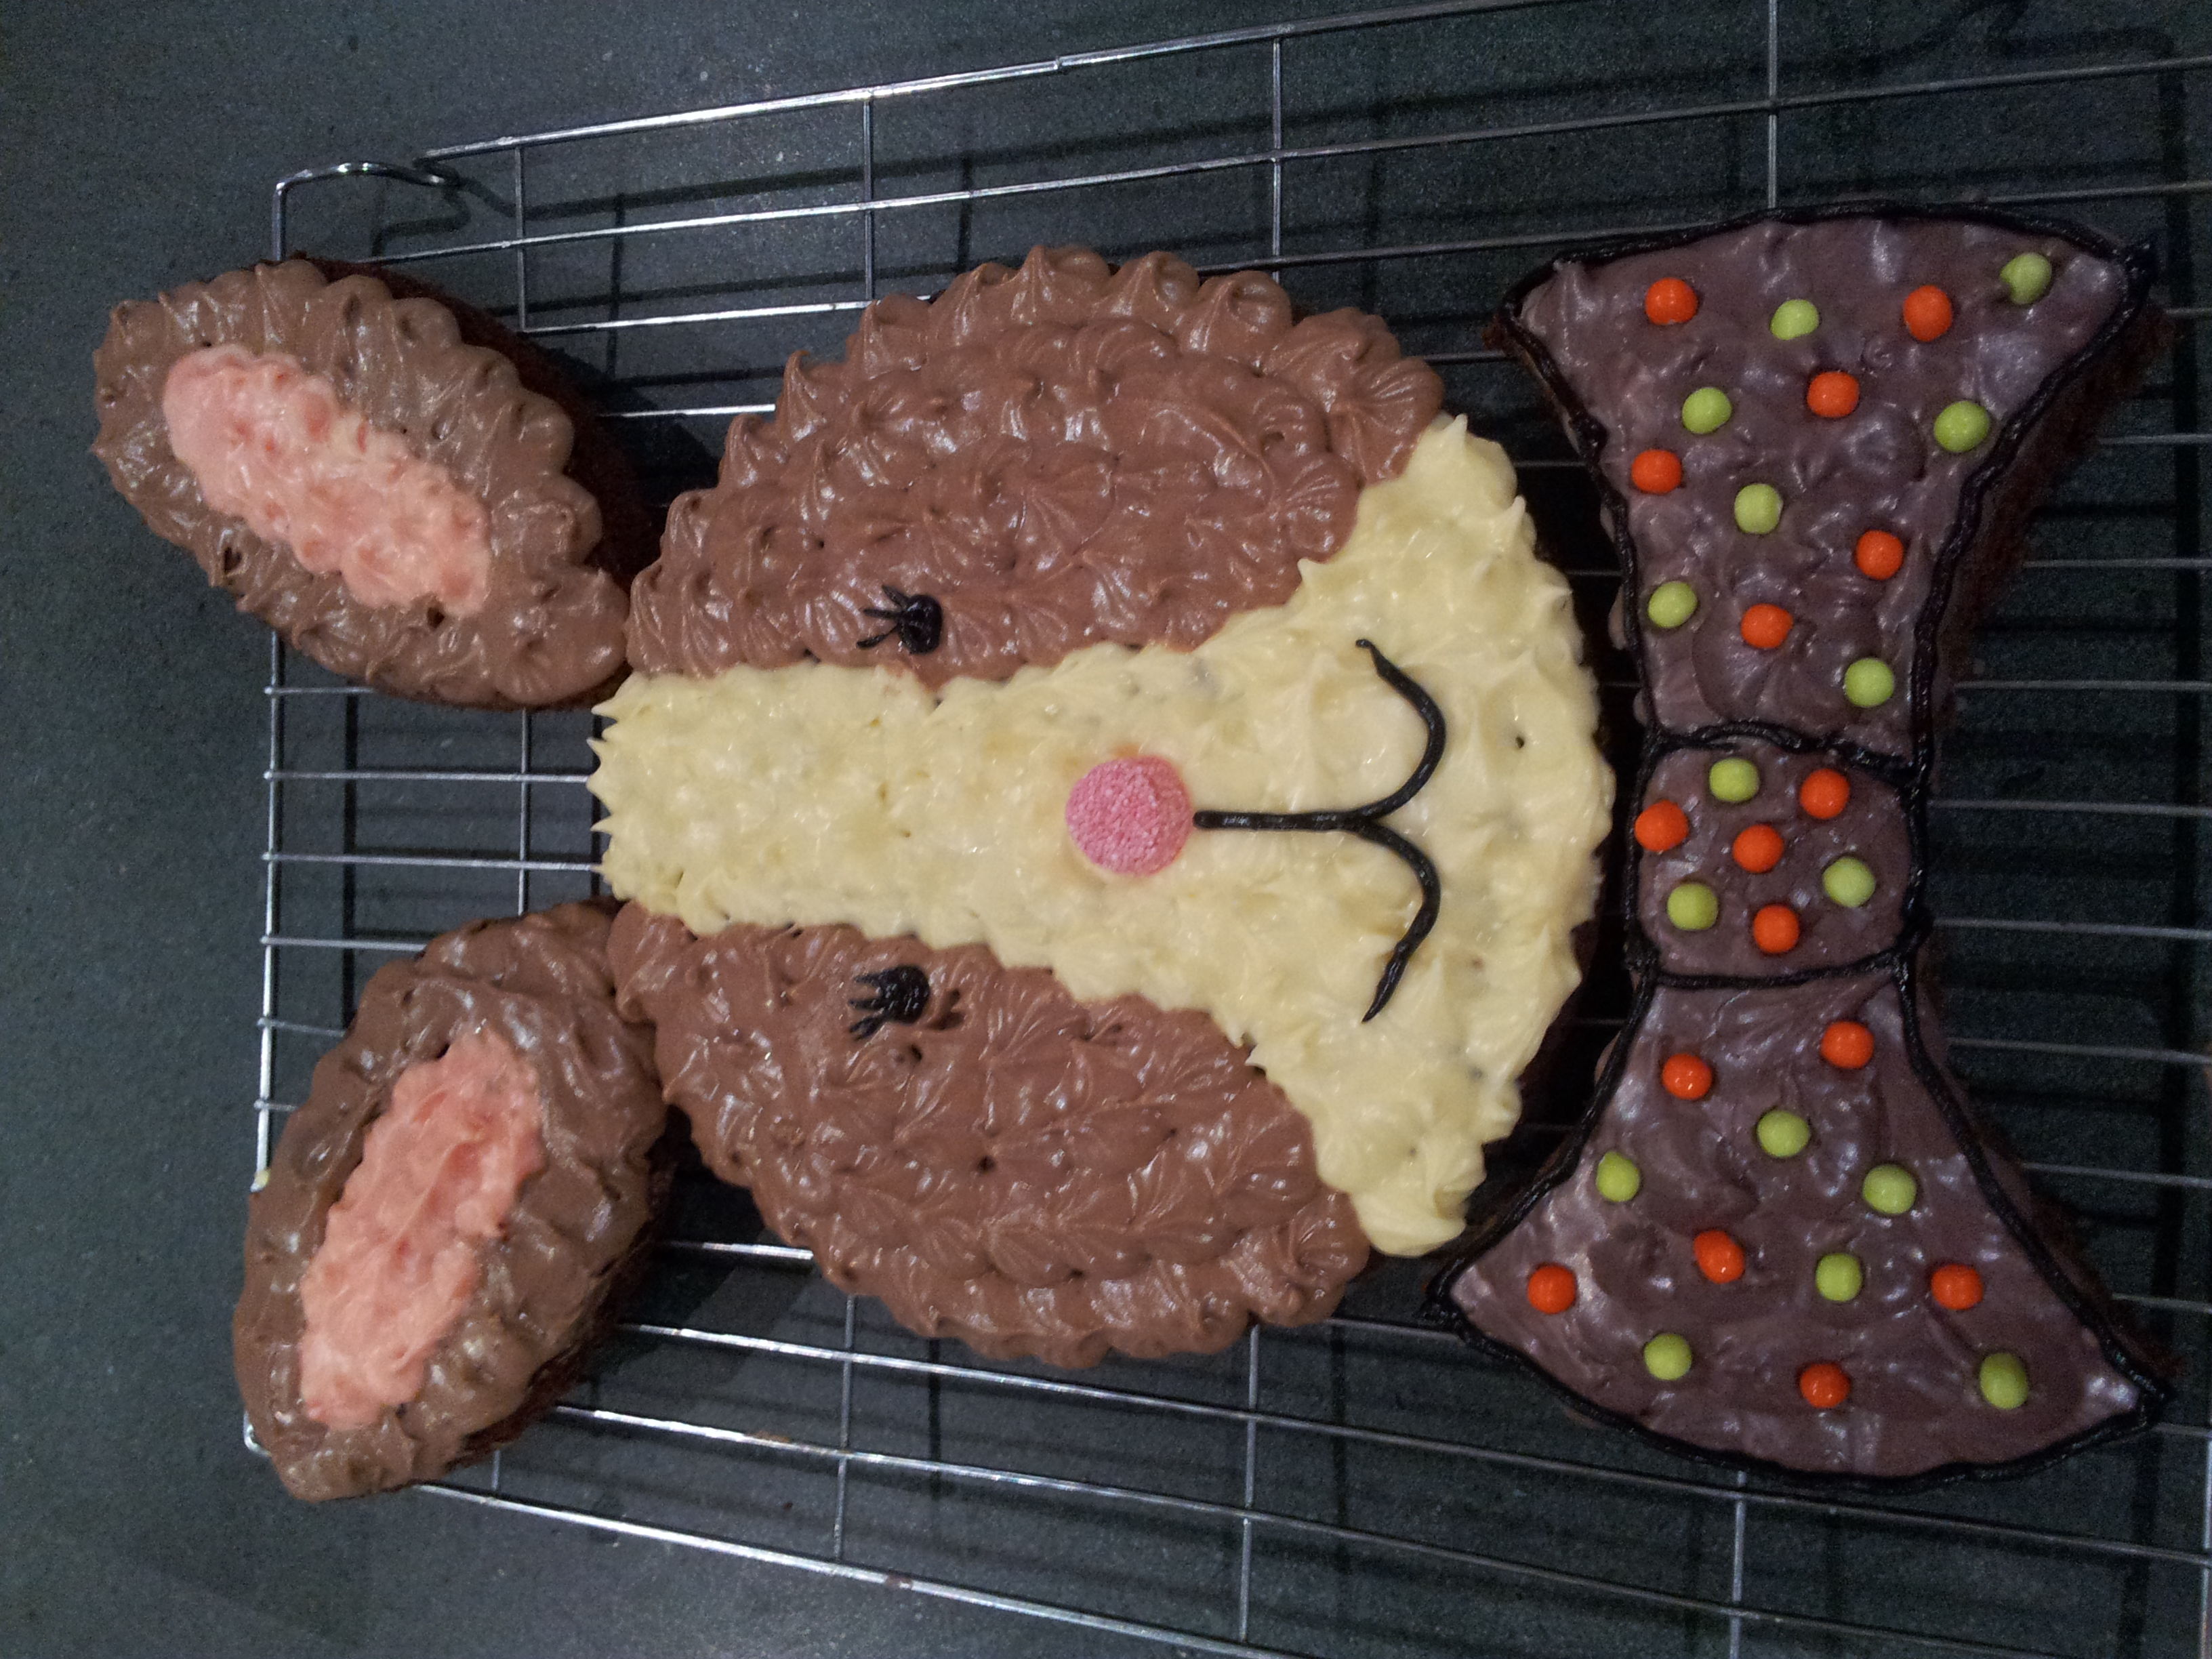 Bunny Cake with Round Cake Pans 